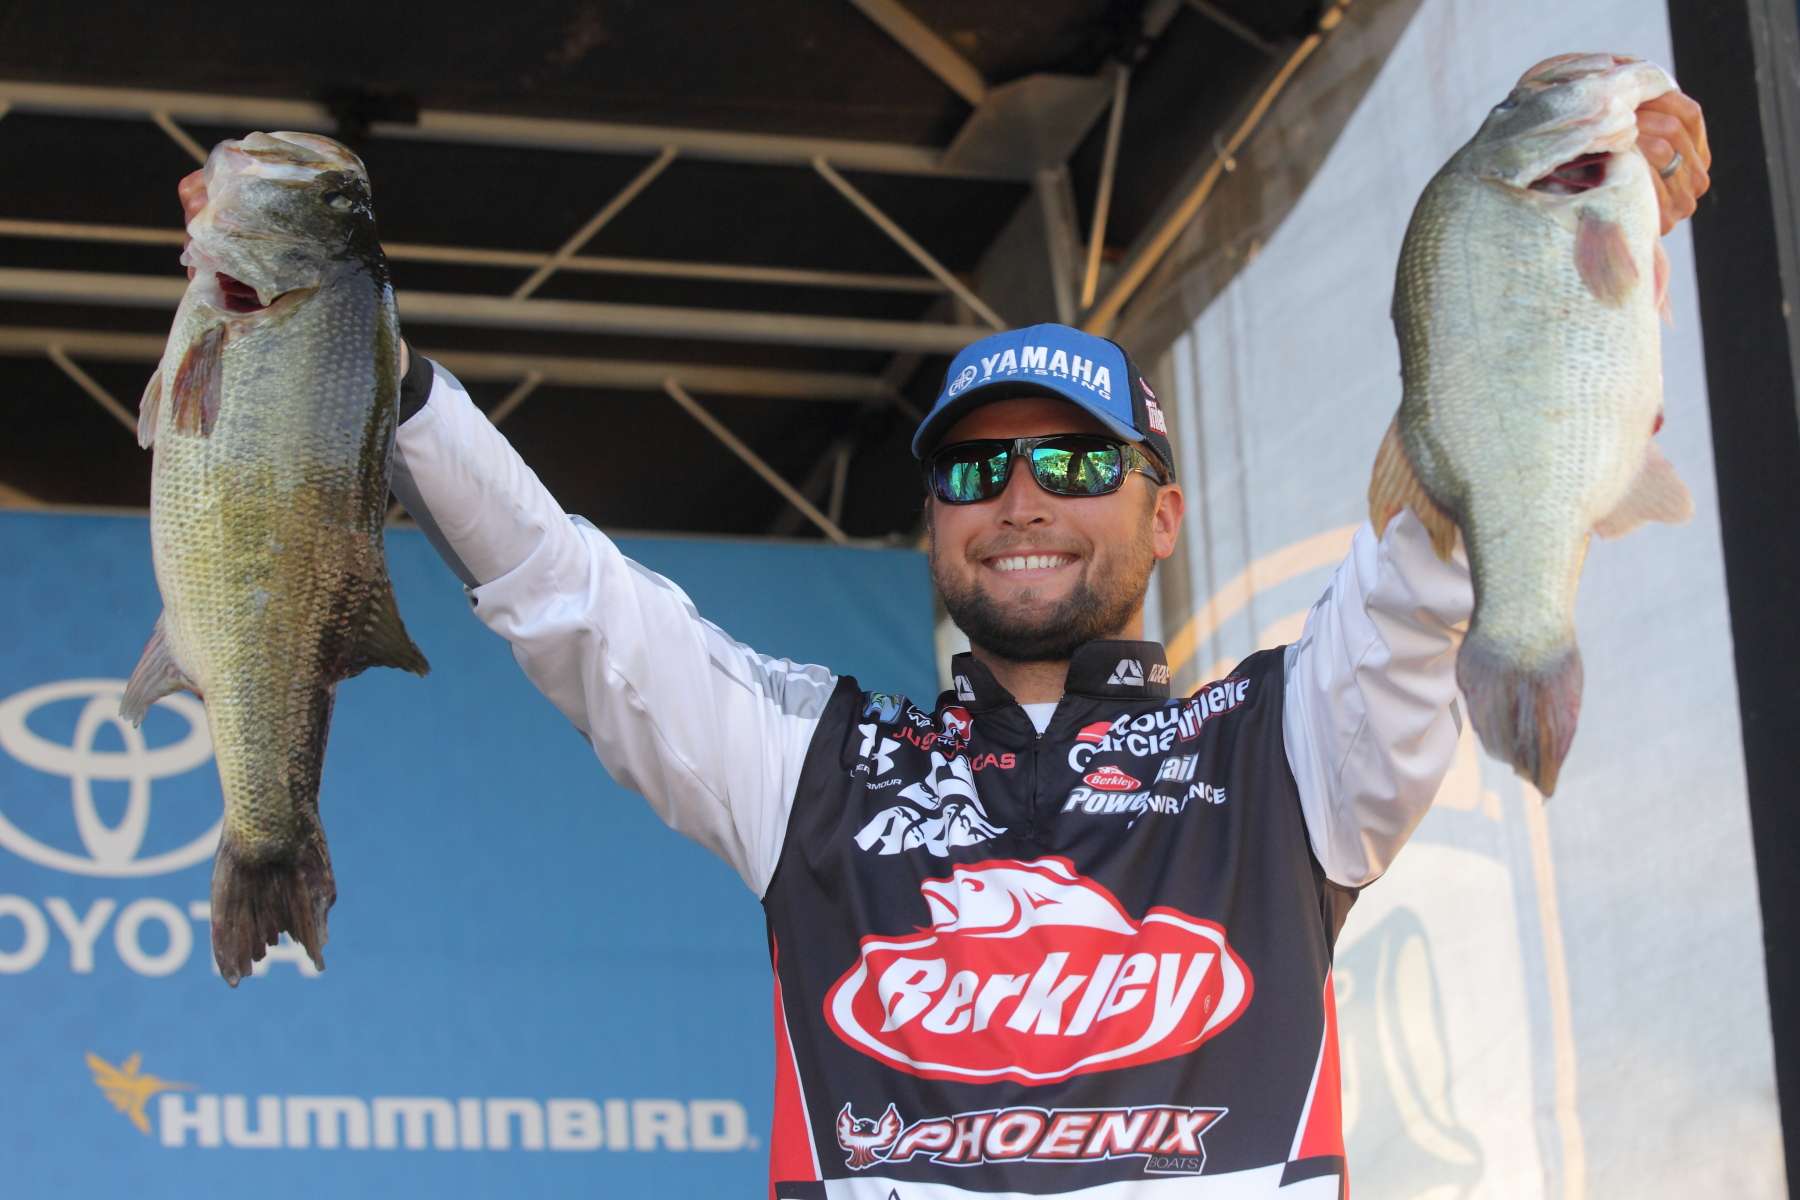 The Elite season is a totally different beast. Most agree itâs not so easy to select winners of each event. Zona came closest last year when he said someone who cut their teeth on the California Delta would win there. He named Skeet Reese and Ish Monroe, but Justin Lucas, who actually grew up on the fishery, made him look right on that count. And the same deal happened for Havasu.